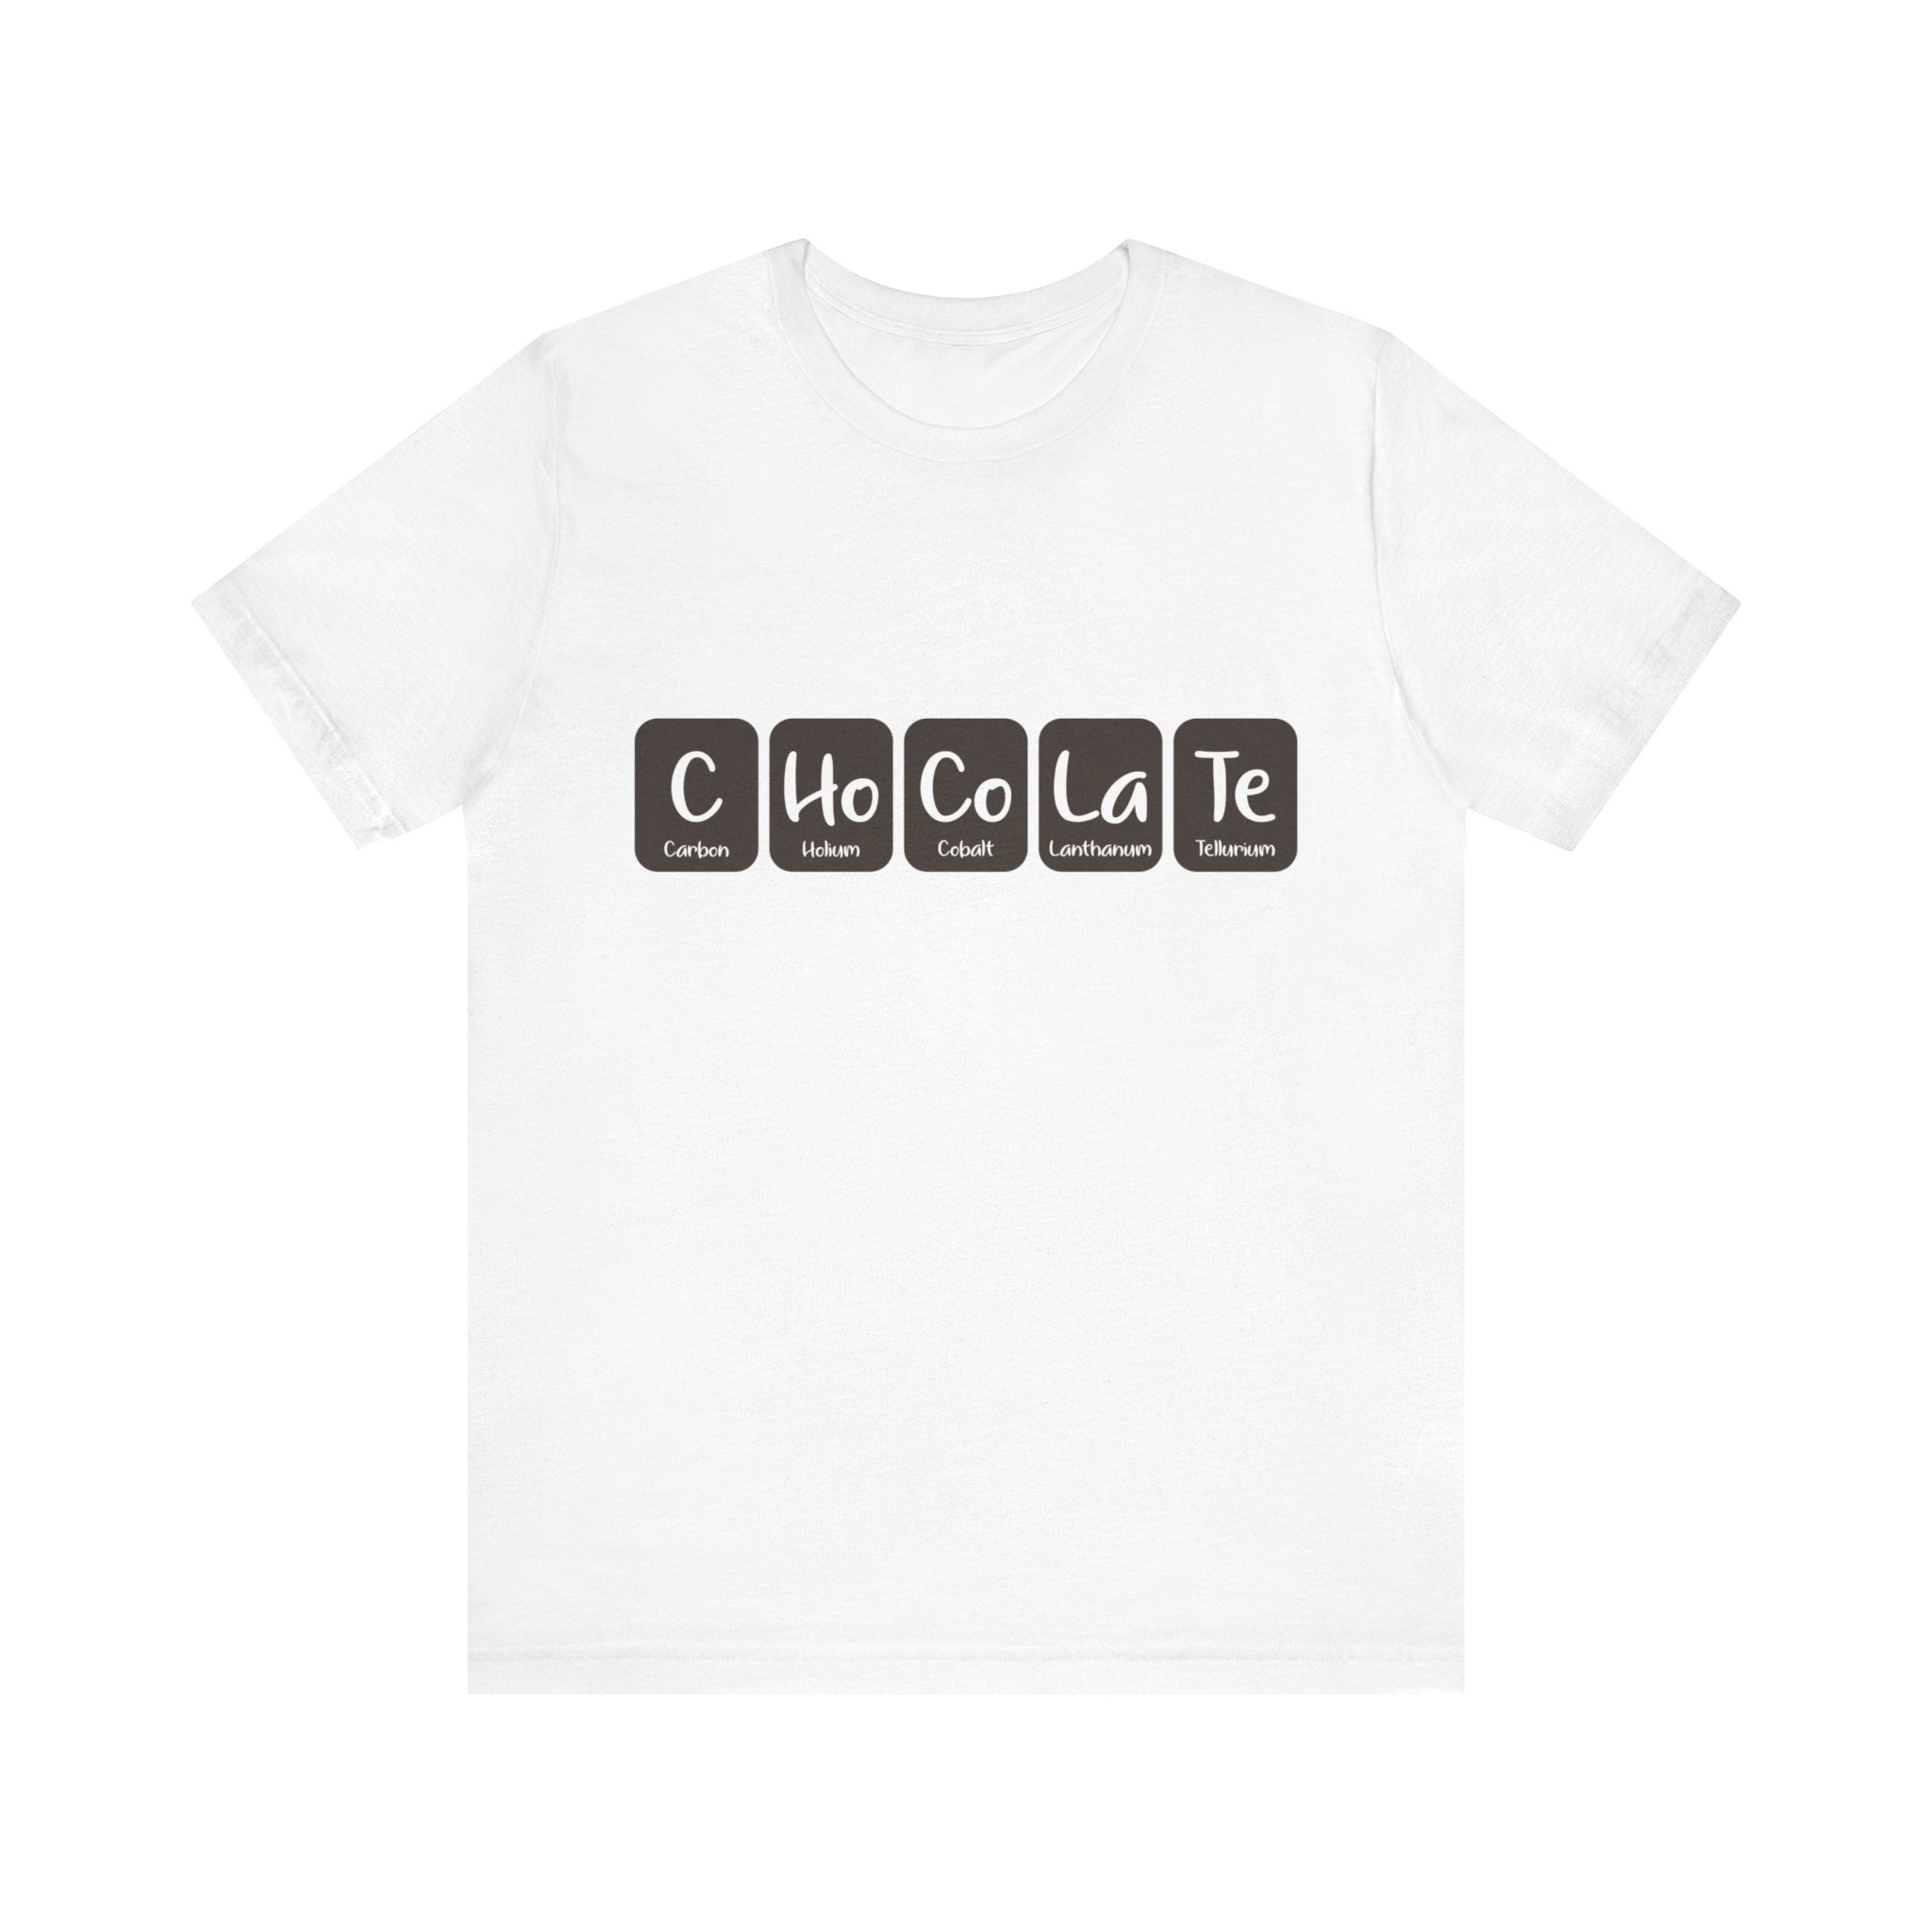 Stylish white C-Ho-Co-La-Te - T-Shirt with black elements of the periodic table spelling out "Chocolate" using symbols for Carbon, Holmium, Cobalt, Lanthanum, and Tellurium. Made from 100% Airlume cotton for ultimate comfort.